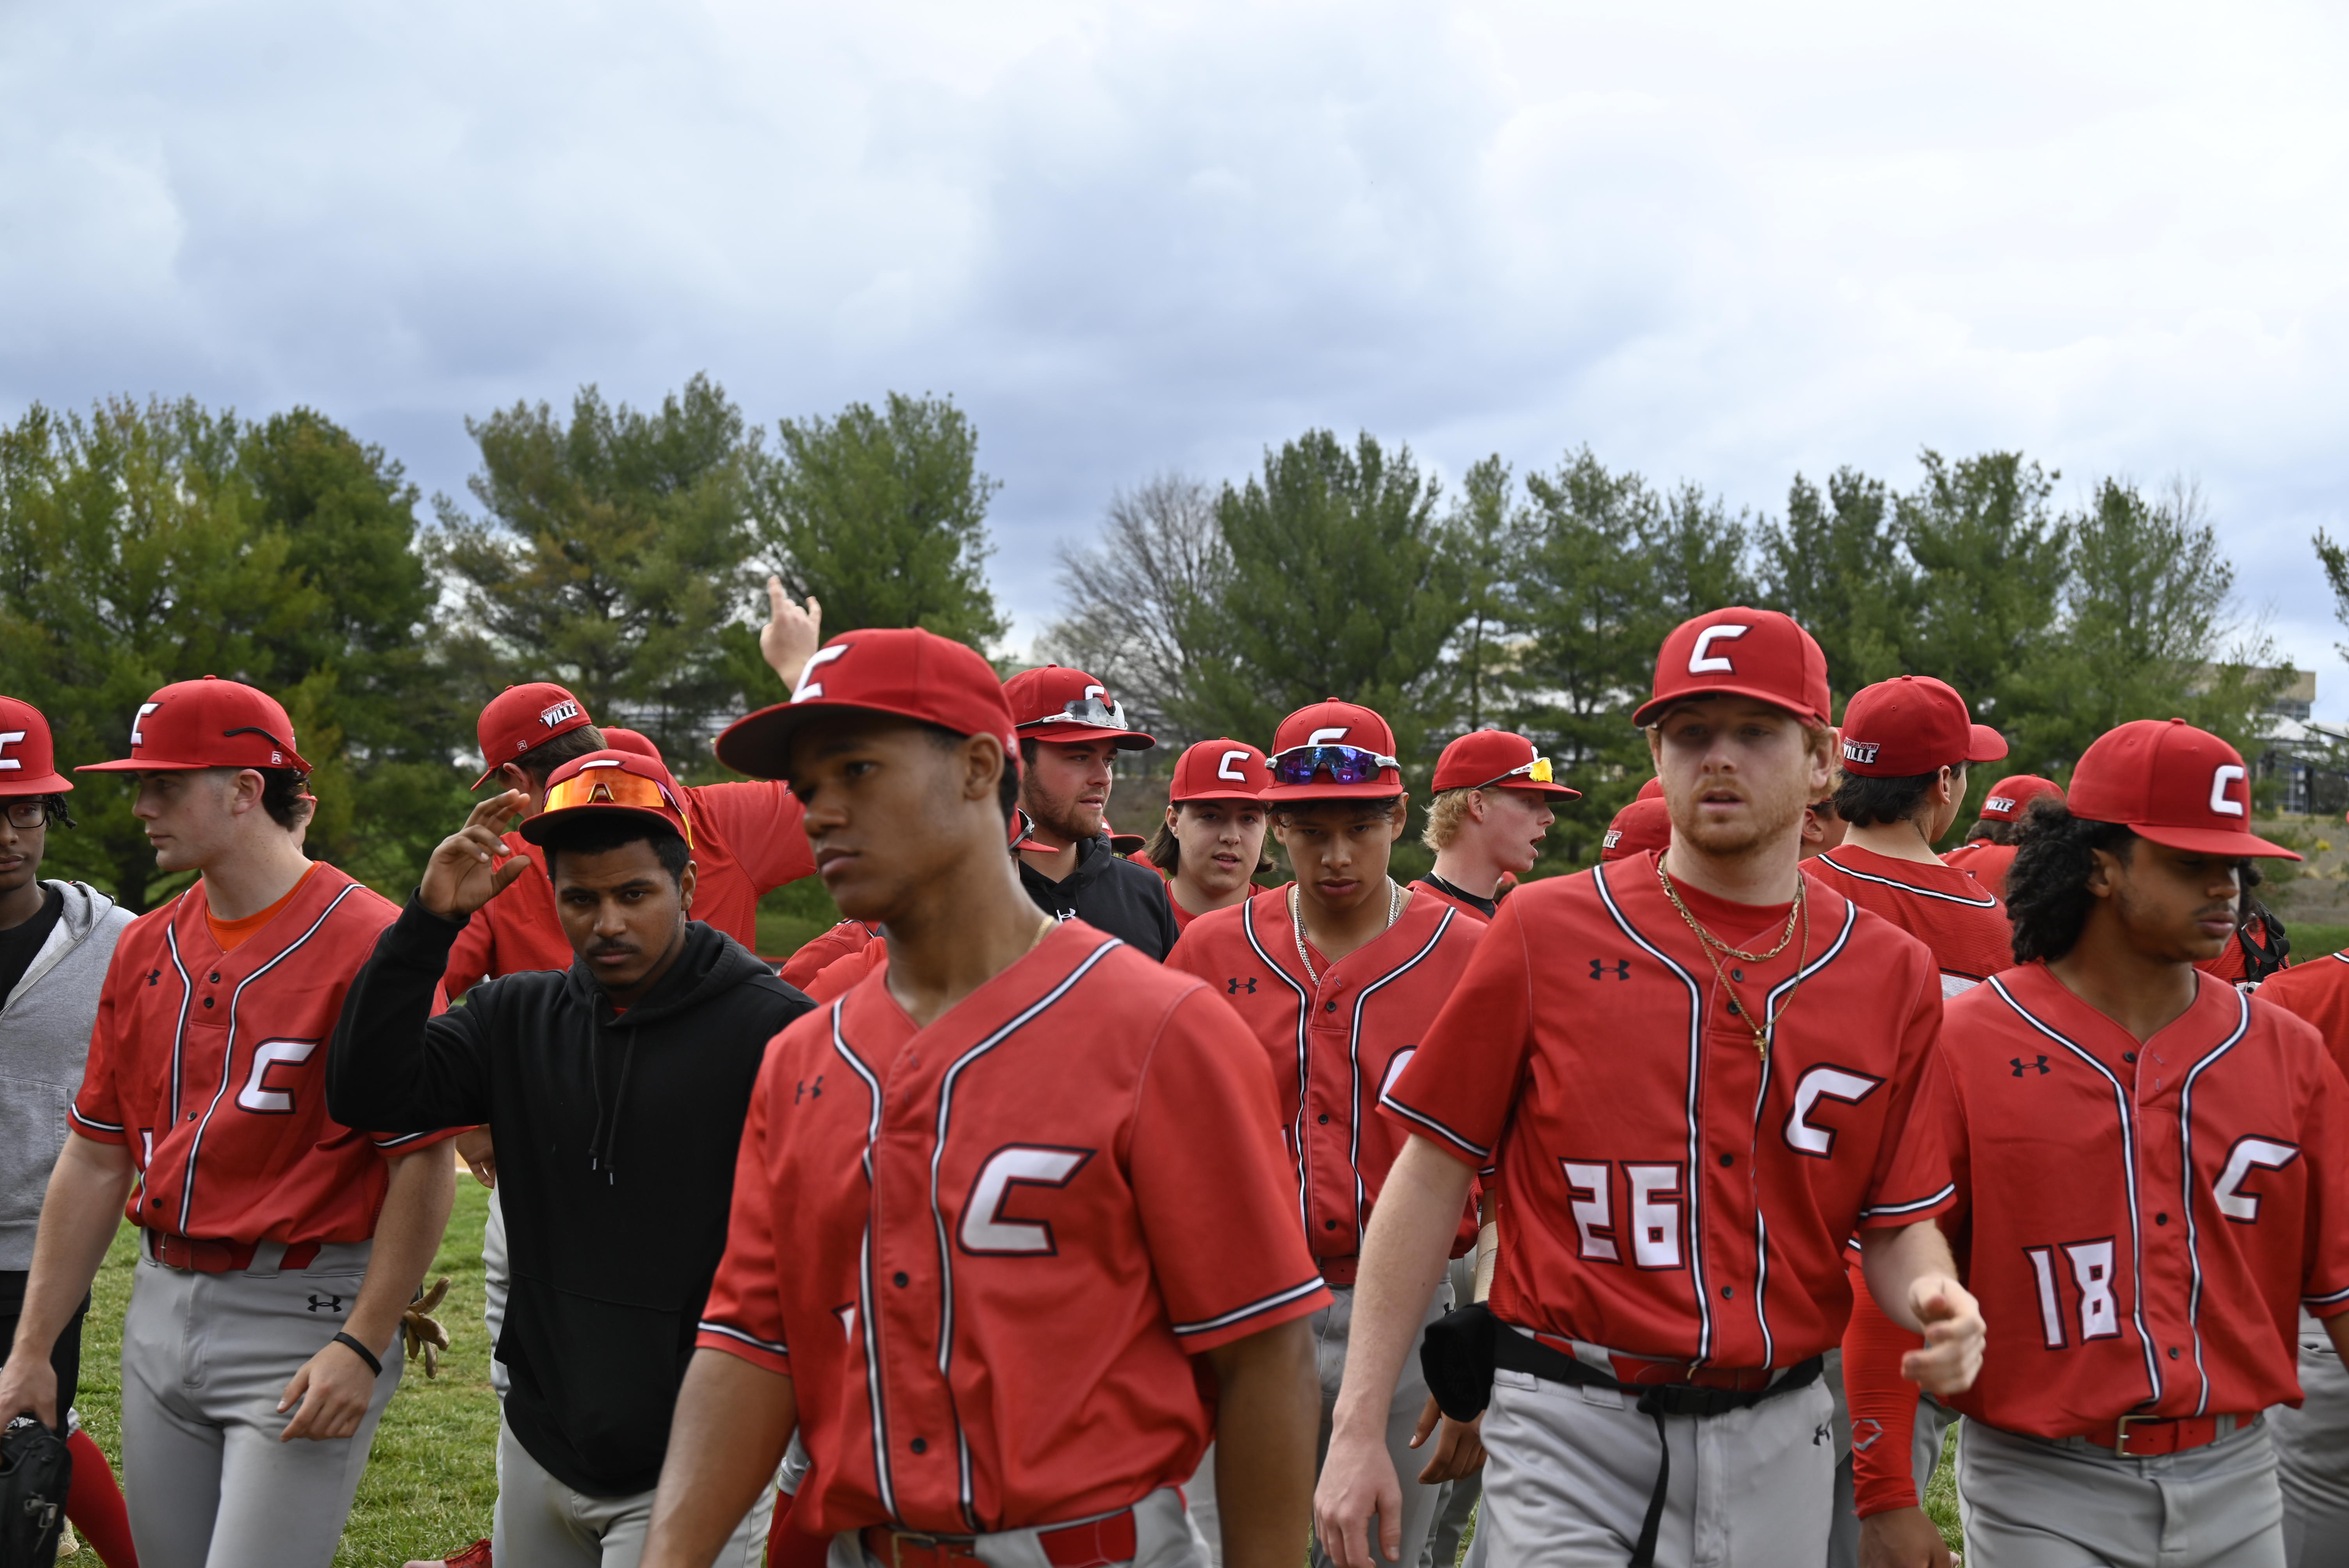 CCBC Catonsville vs College of Southern Maryland game 1 recap